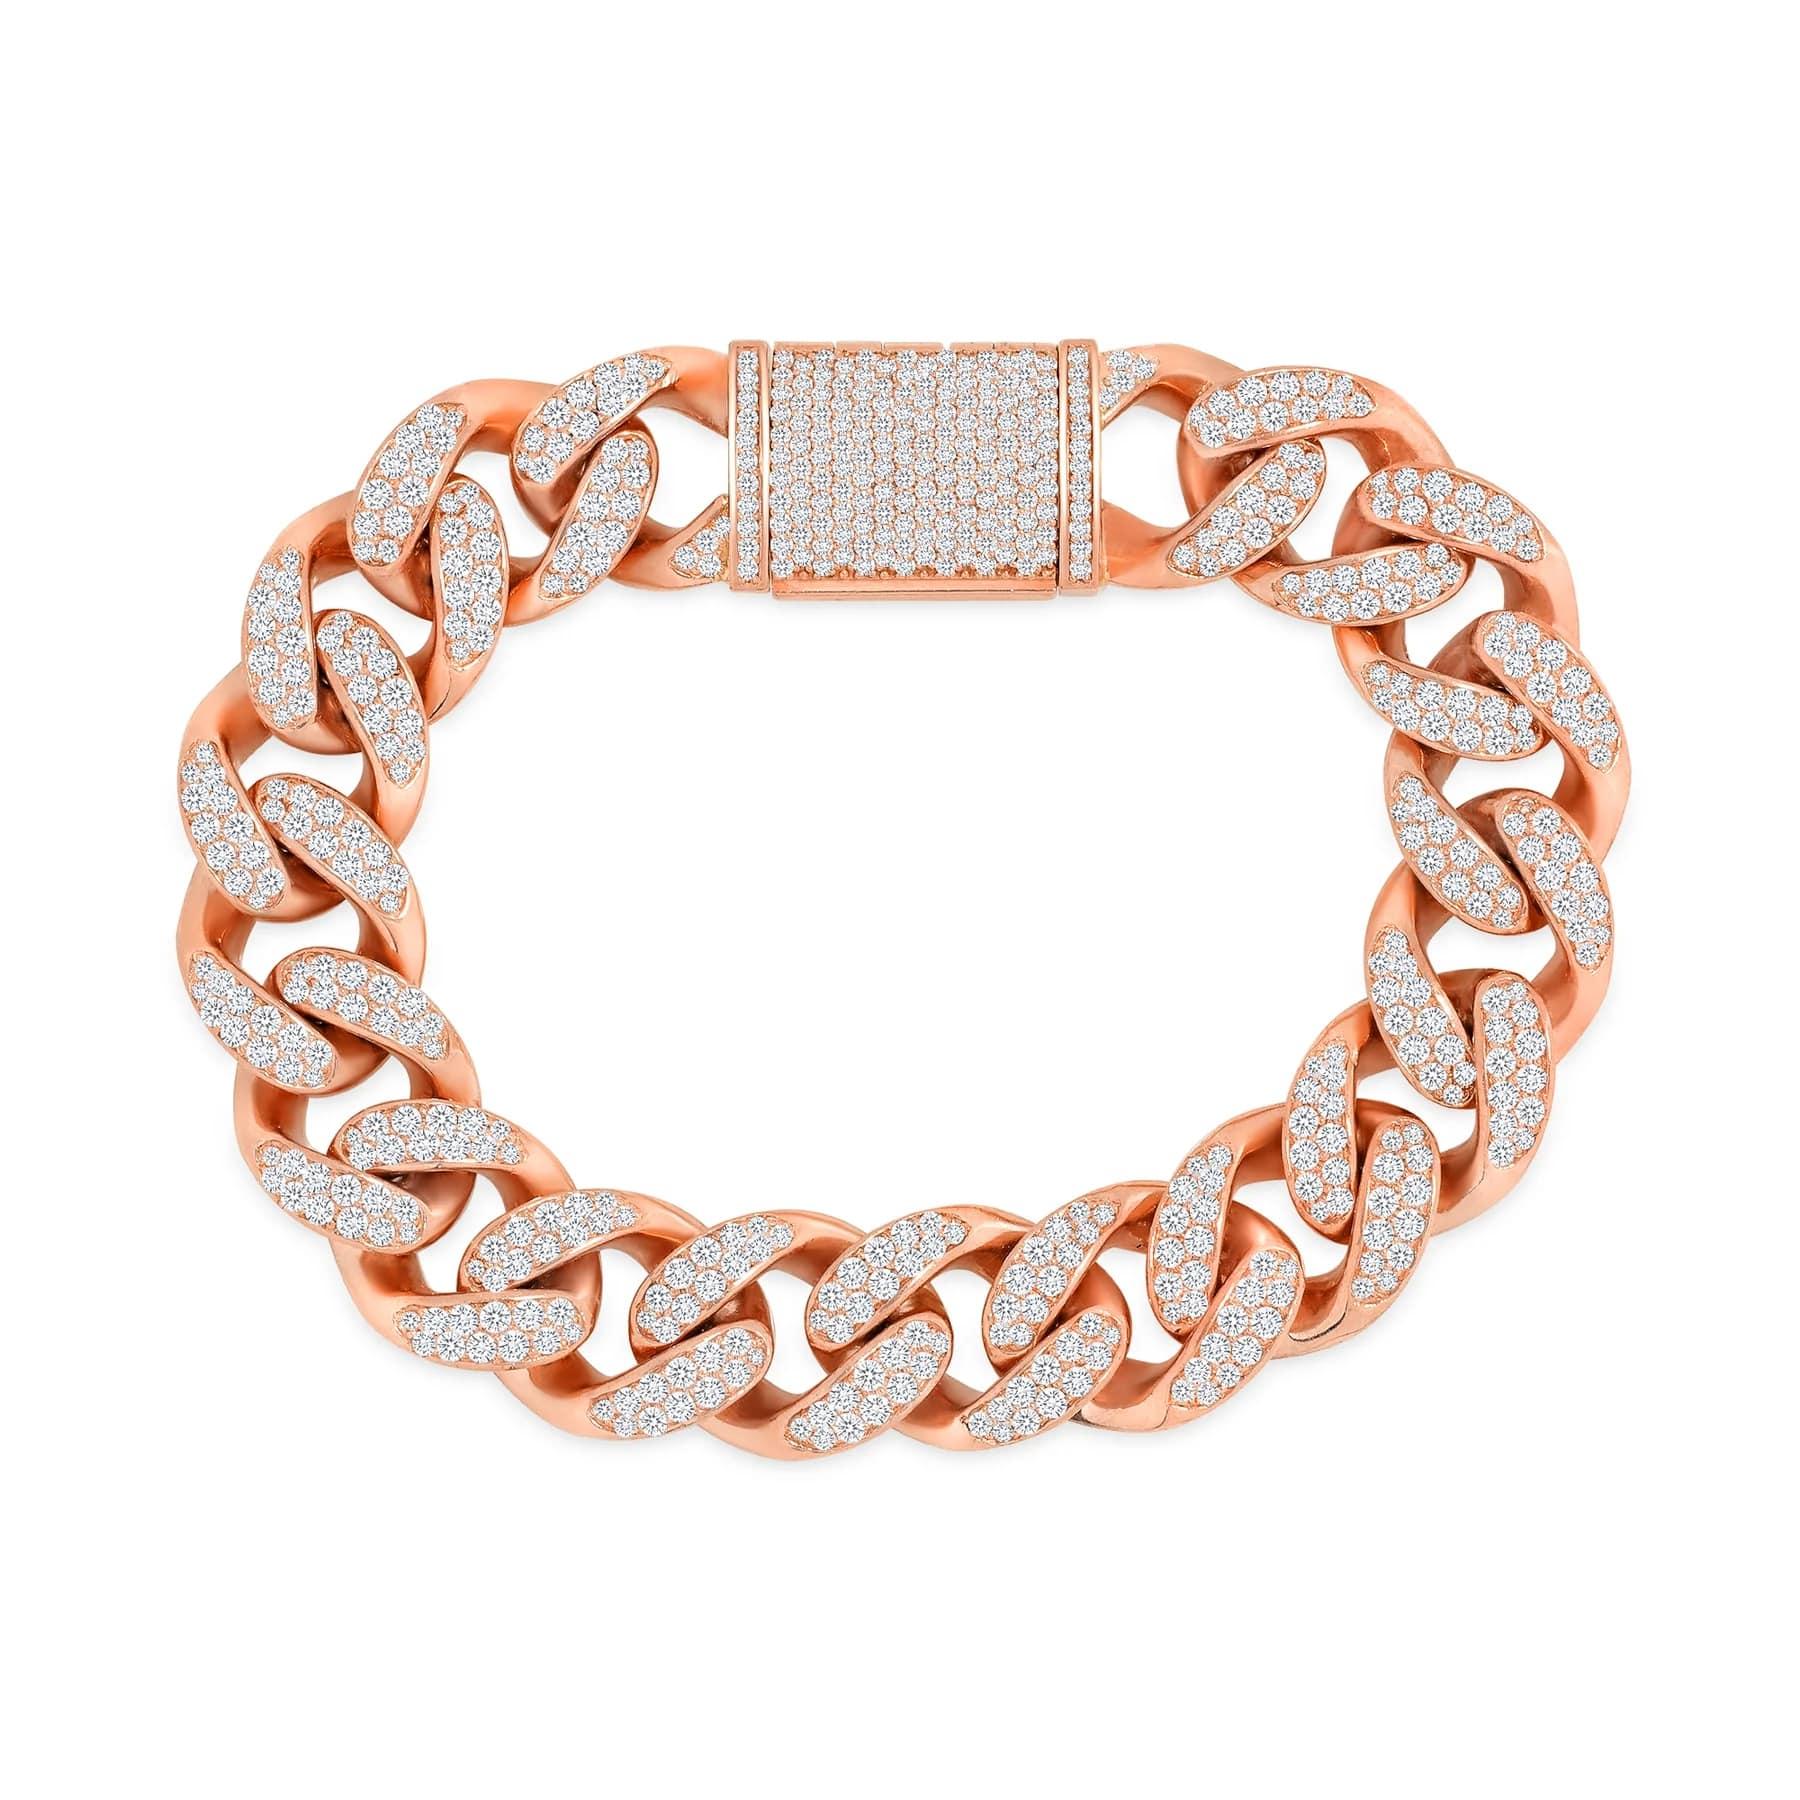 This diamond cuban bracelet compliments any outfit and shines in every setting. 

Bracelet Information 
Metal : 14k Gold
Color : White Gold, Yellow Gold, Rose Gold
Diamond Cut : Round 
Diamond Carats : 6ct
Diamond Clarity : VS -SI
Size : 8 Inches
